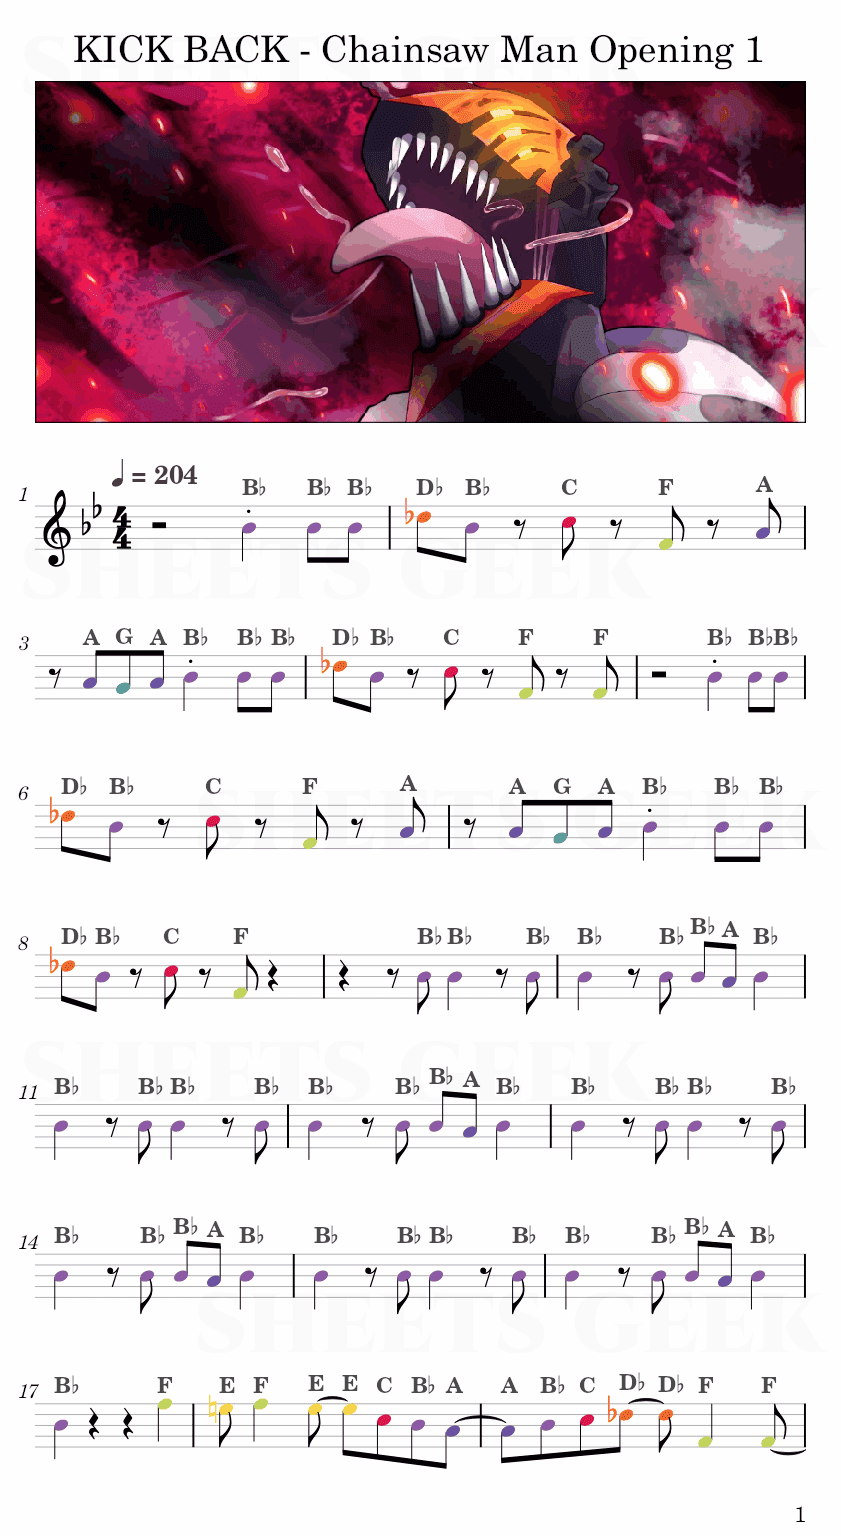 KICK BACK by Kenshi Yonezu (米津 玄師) - Chainsaw Man Opening 1 Easy Sheet Music Free for piano, keyboard, flute, violin, sax, cello page 1